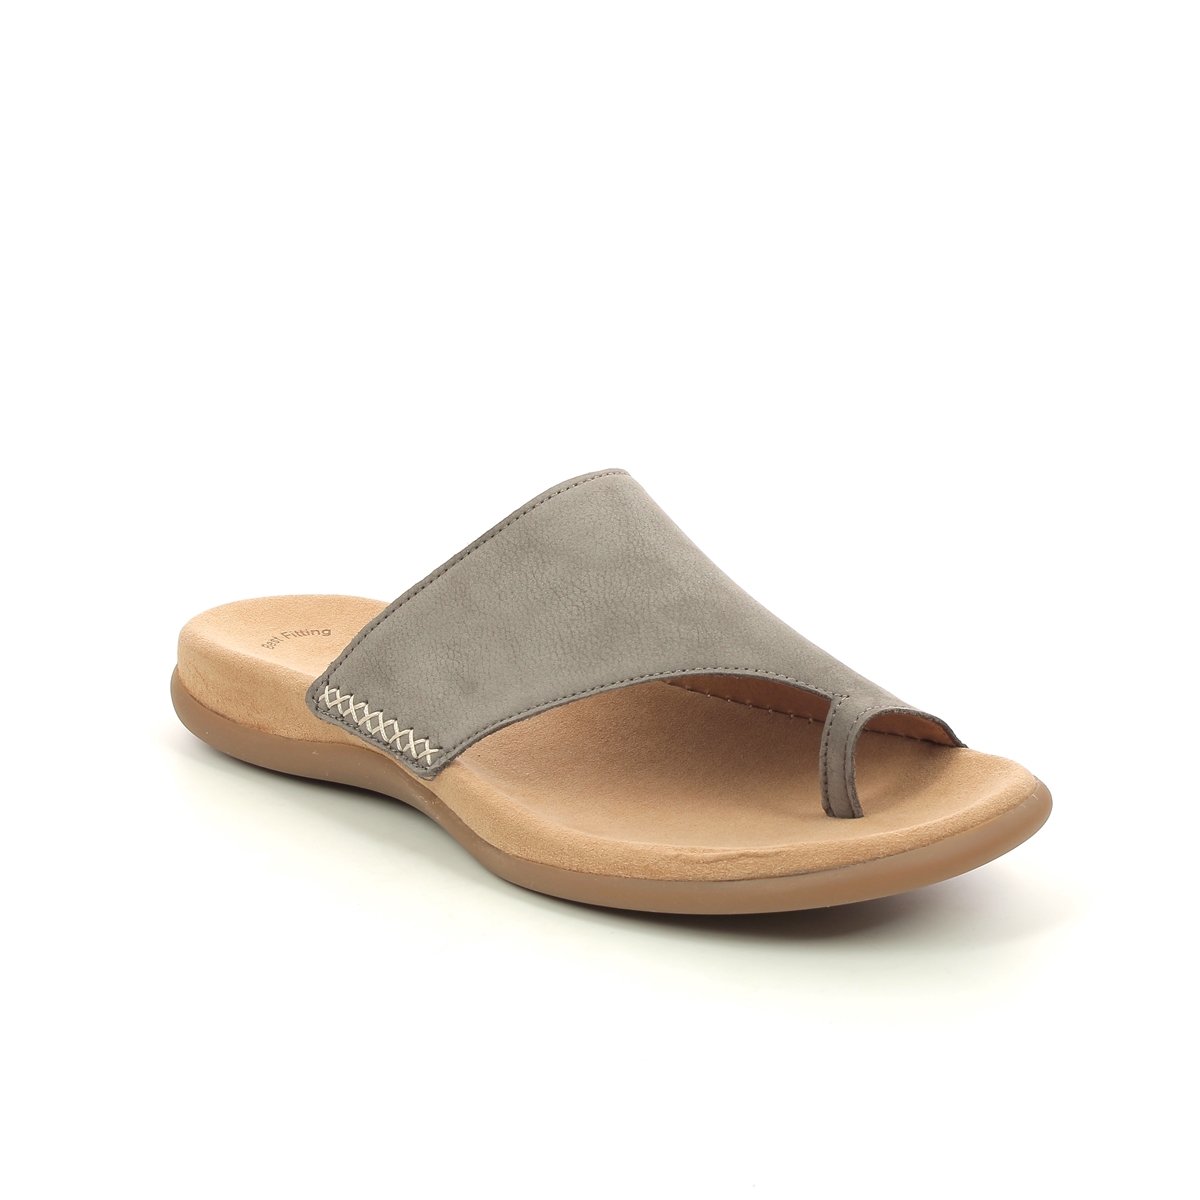 Gabor Lanzarote Taupe Nubuck Womens Toe Post Sandals 03.700.13 In Size 43 In Plain Taupe Nubuck  Womens Comfortable Sandals In Soft Taupe Nubuck Leath